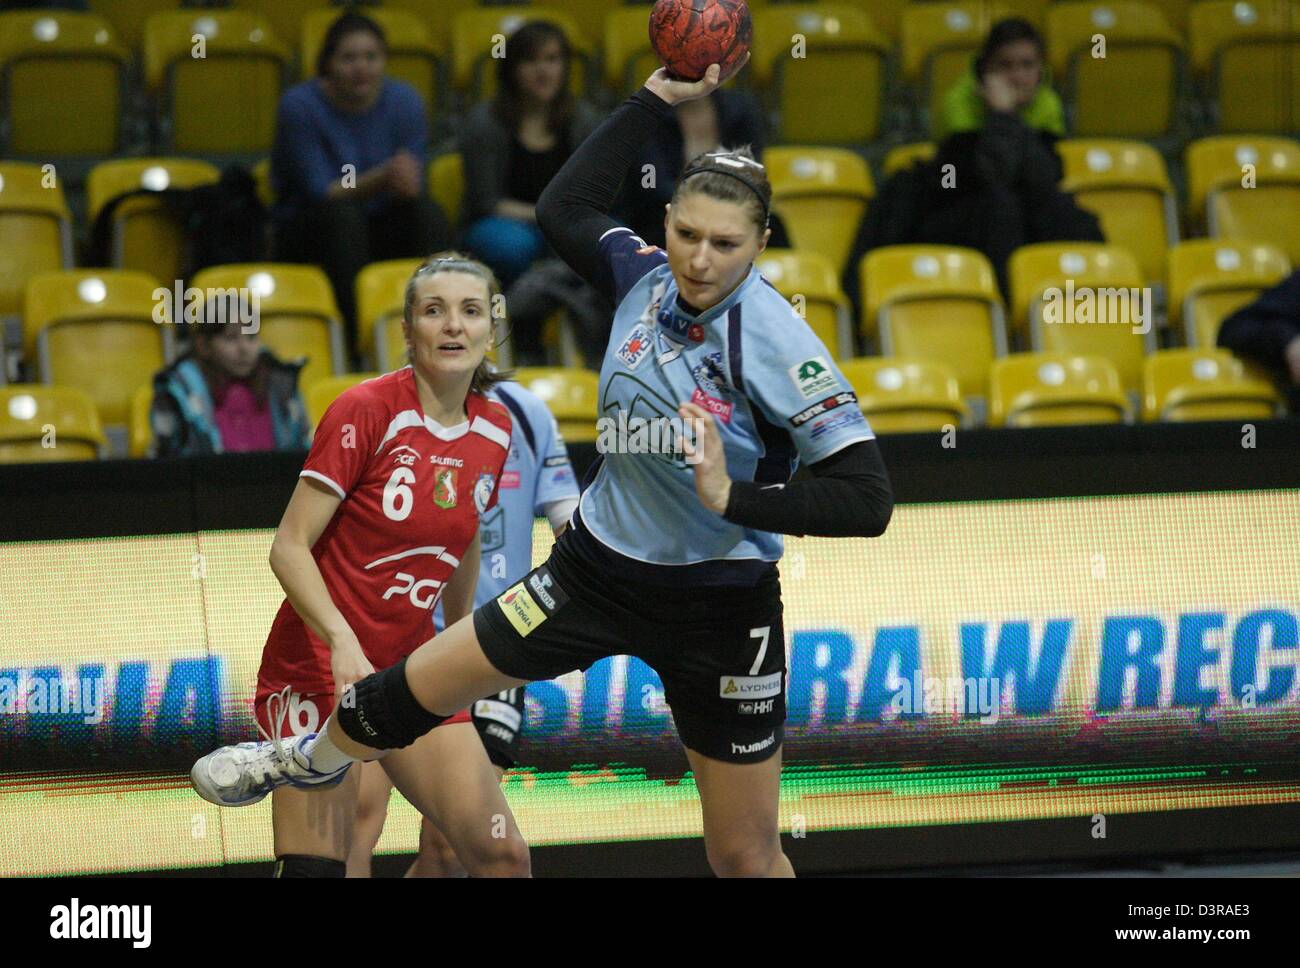 Gdynia, Poland 23rd, February 2013 Handball: Final Four of the PGNiG Polish Cup. SPR Lublin v KPR Ruch Chorzow game at HSW sports hall in Gdynia.  Natalia Lanuszny (7) in action during the game. Credit:  Michal Fludra / Alamy Live News Stock Photo